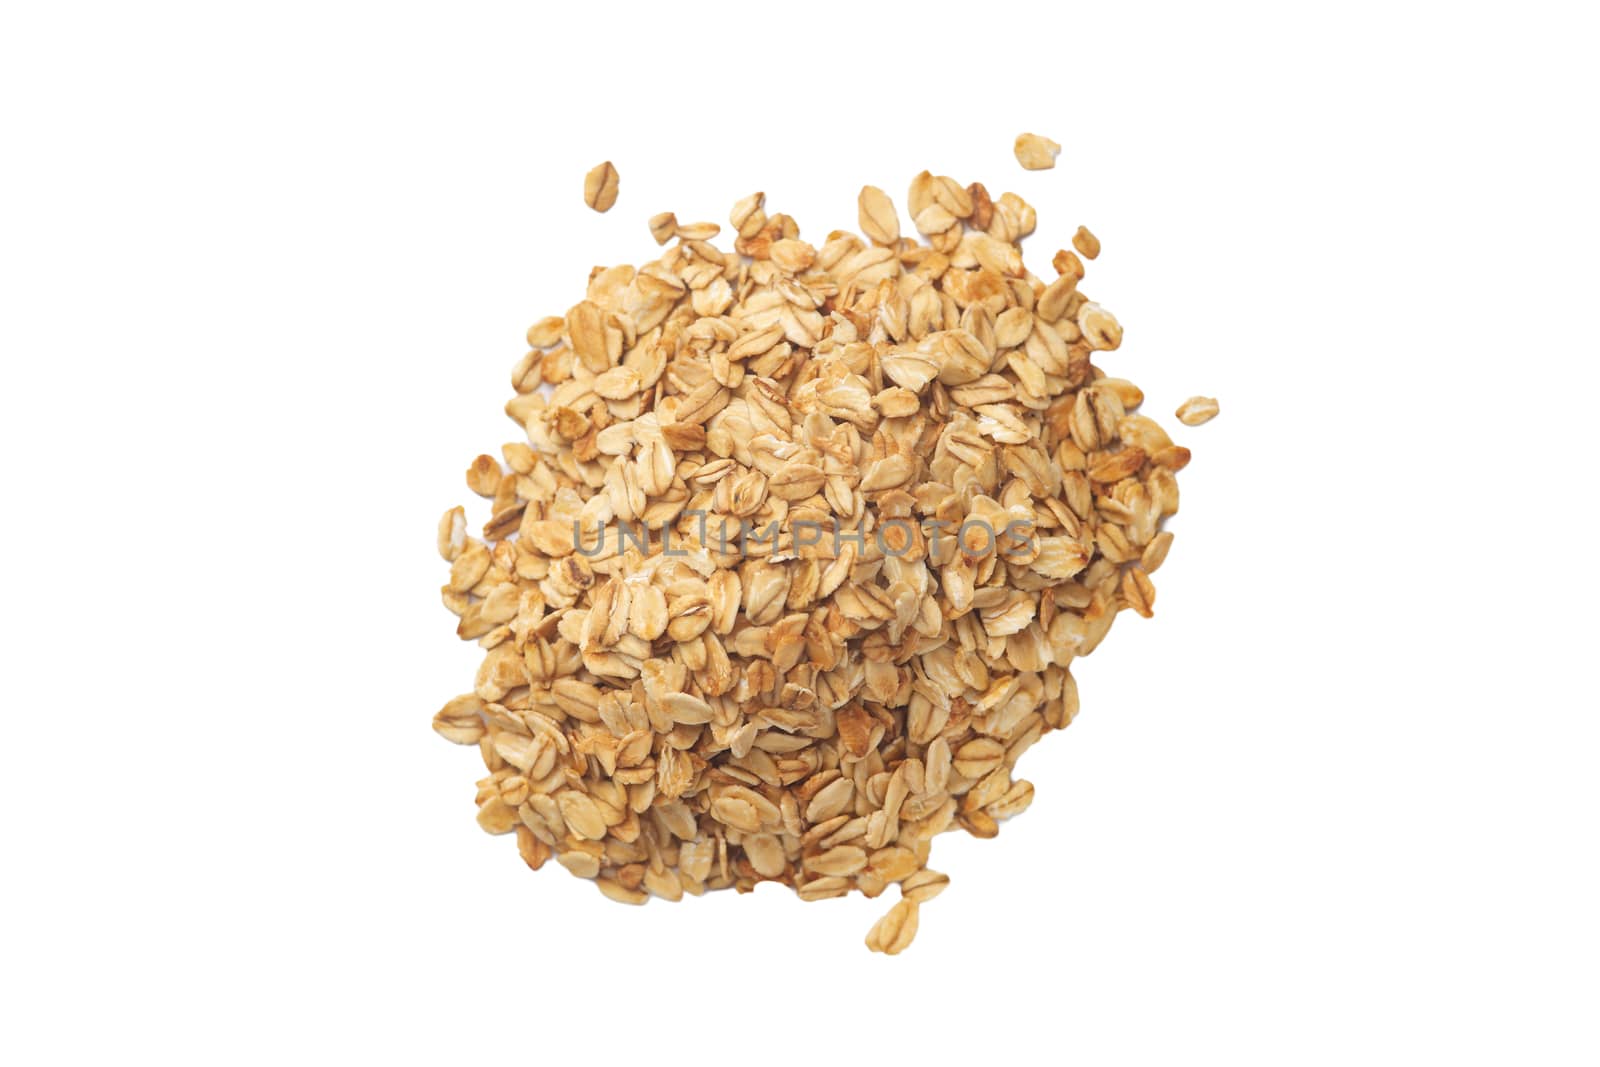 A bunch of cereal granola flakes isolated on white background. Stock photo of healty diet ingredients. Concept of vegan and vegetarian healty food.